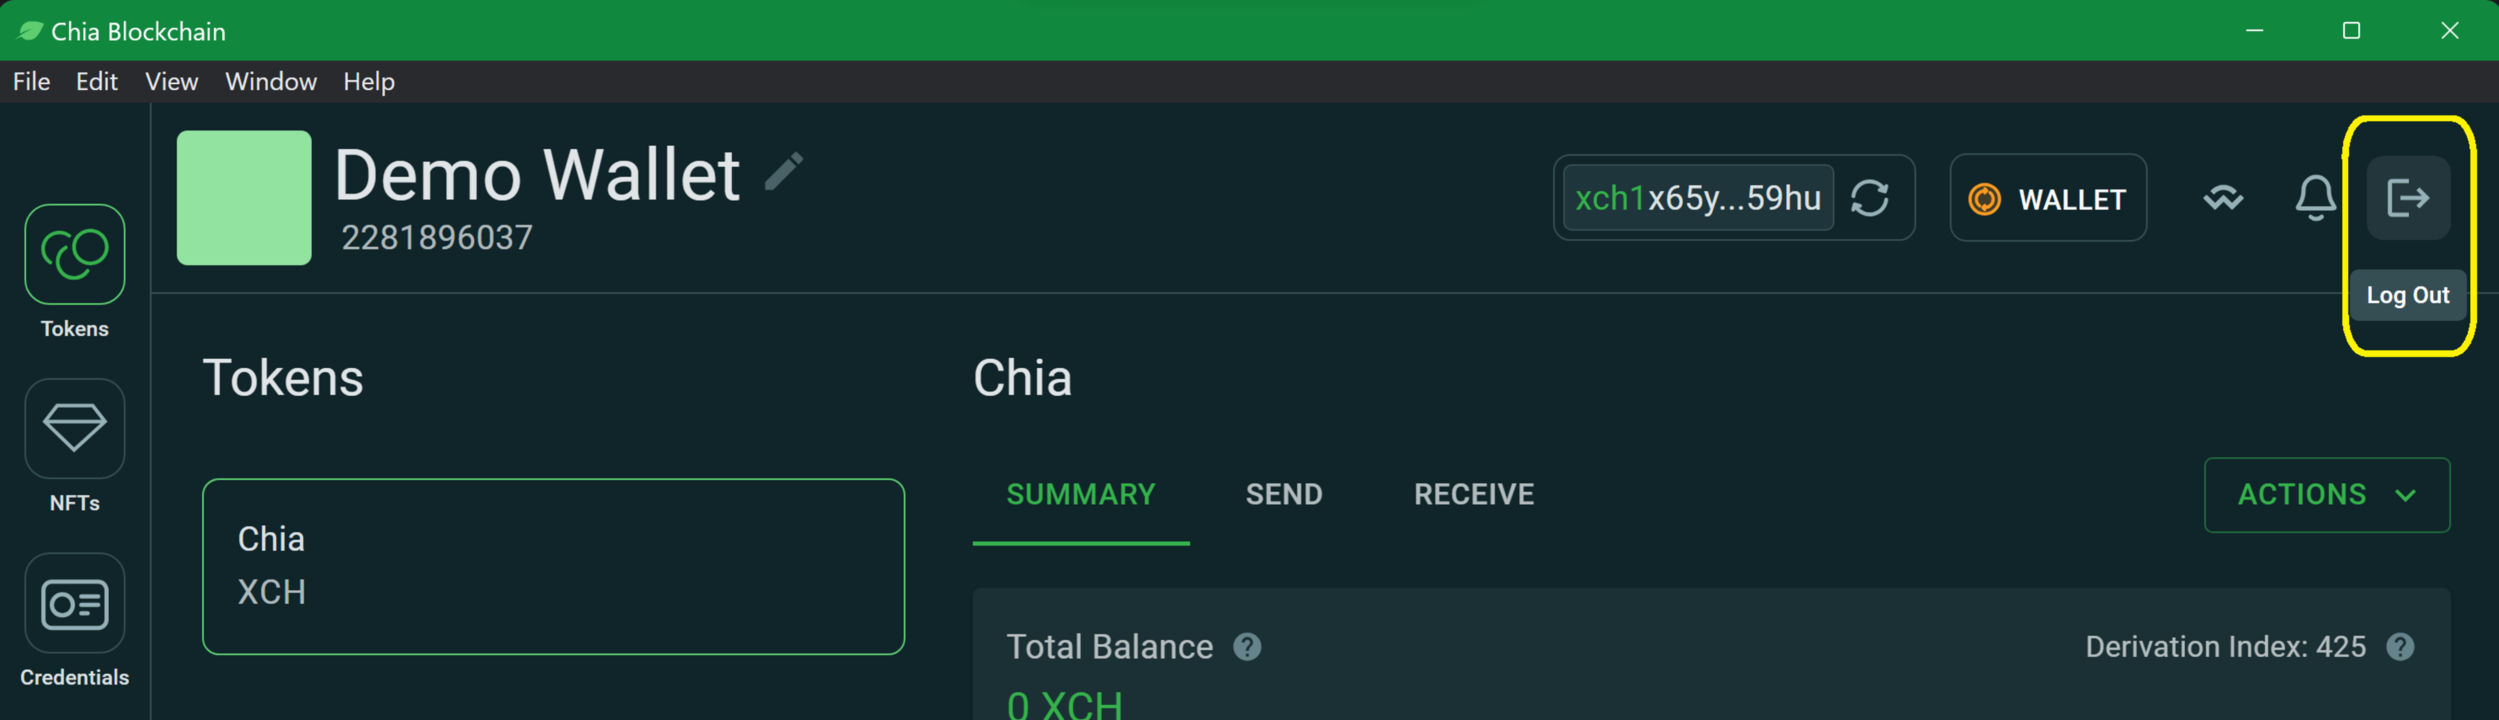 Logout of the Chia wallet